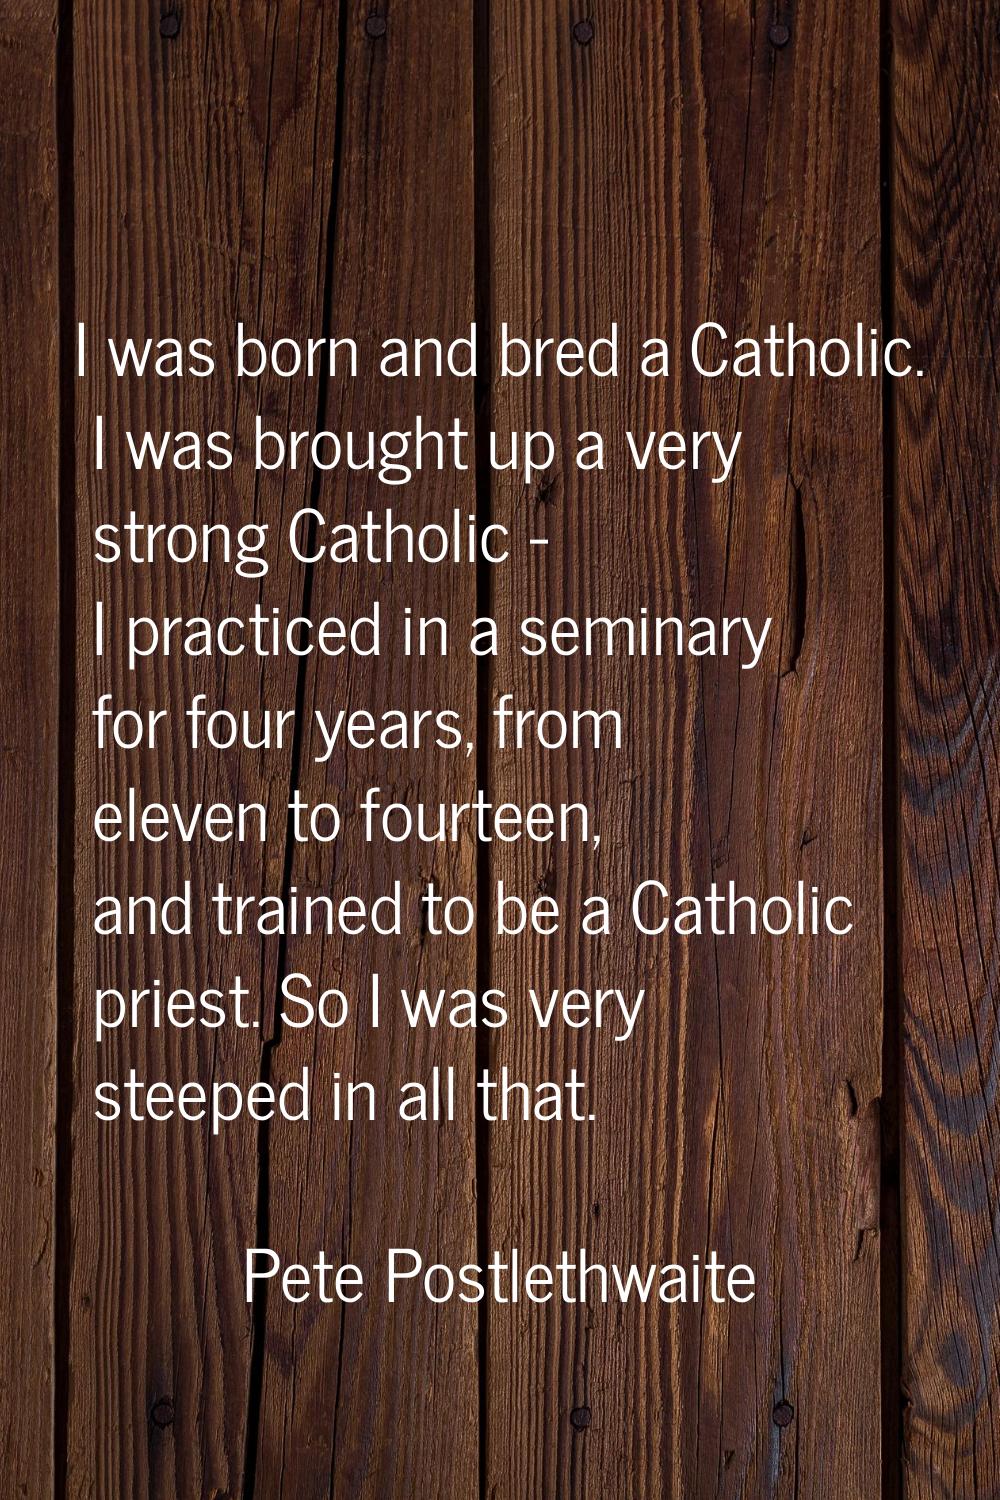 I was born and bred a Catholic. I was brought up a very strong Catholic - I practiced in a seminary